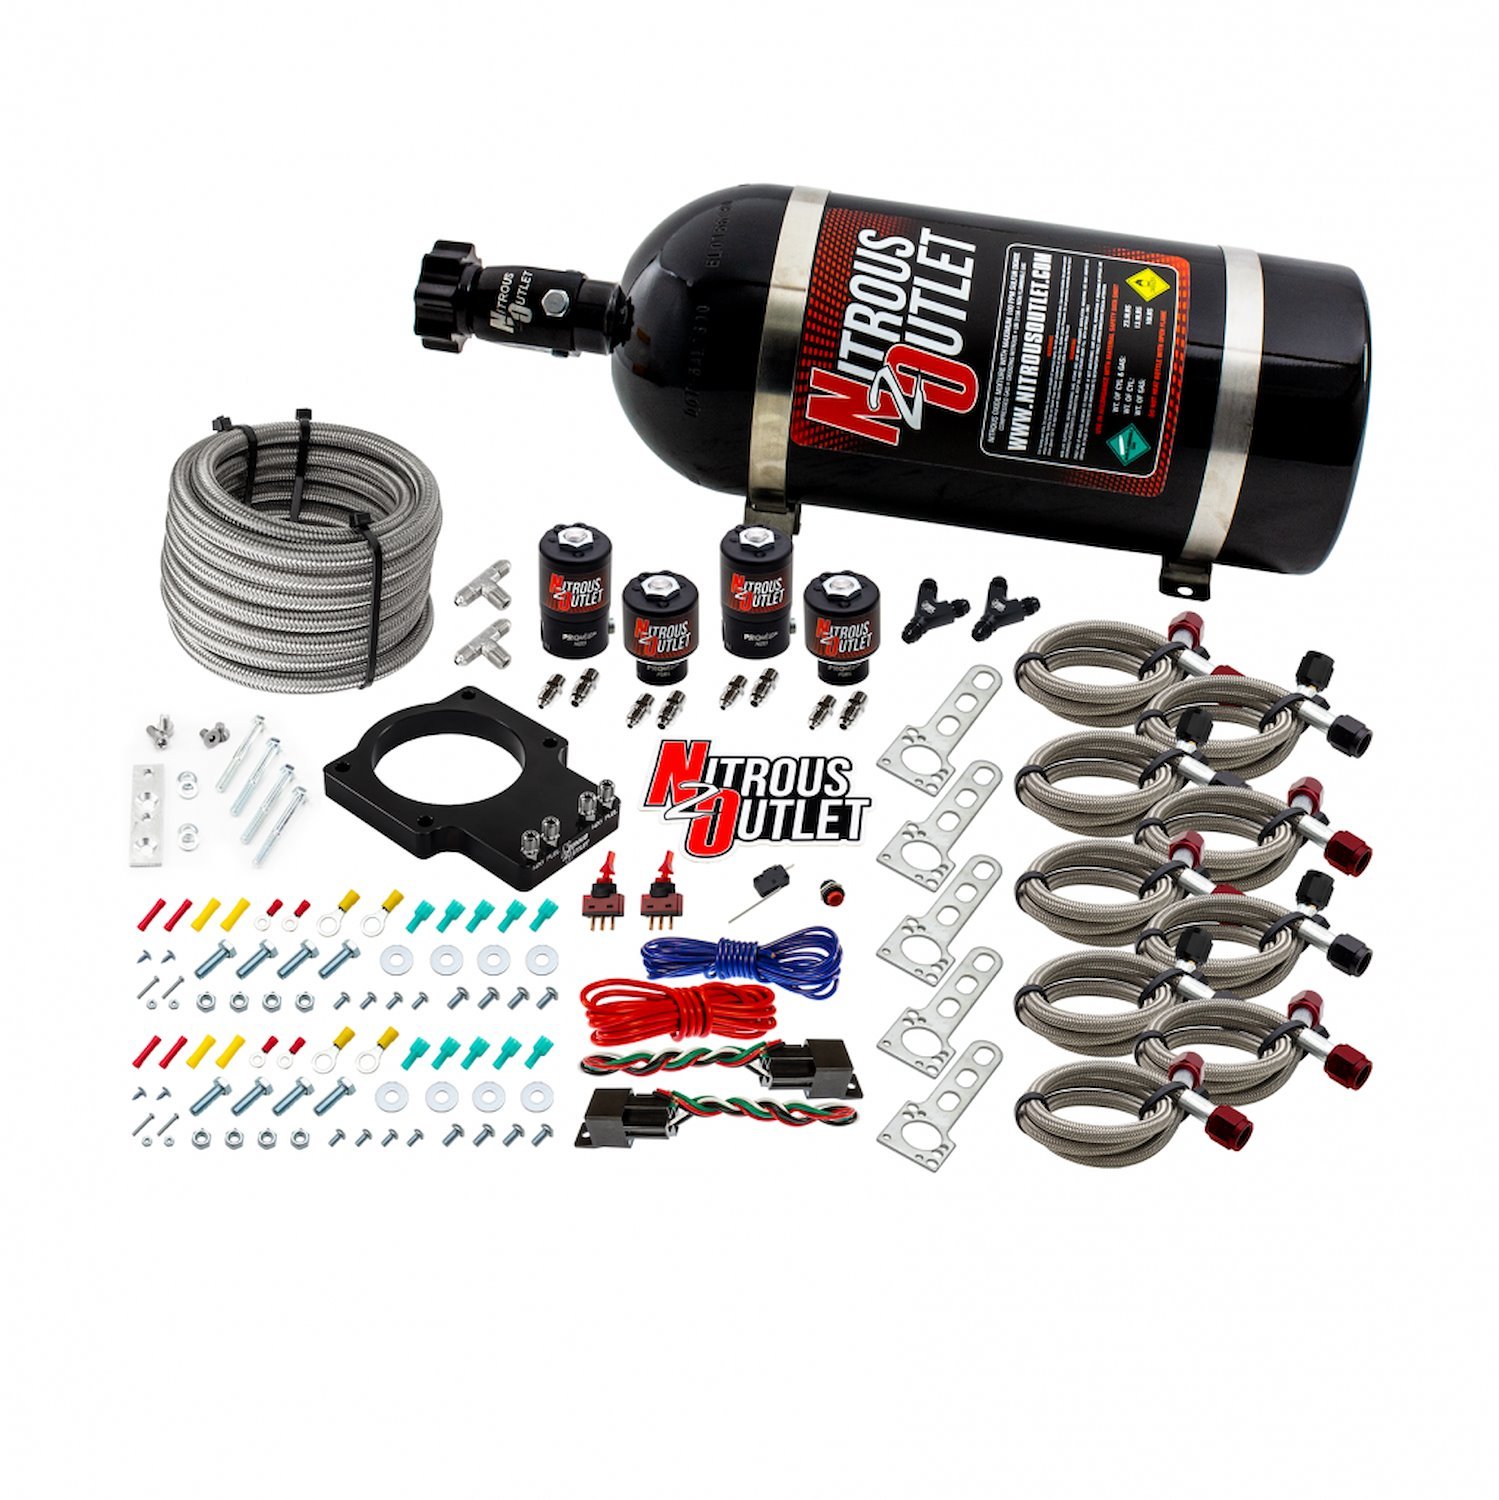 00-10109-00 GM 90 mm LSX Dual-Stage Plate System, Gas/E85, 5-55psi, 50-200HP, No Bottle